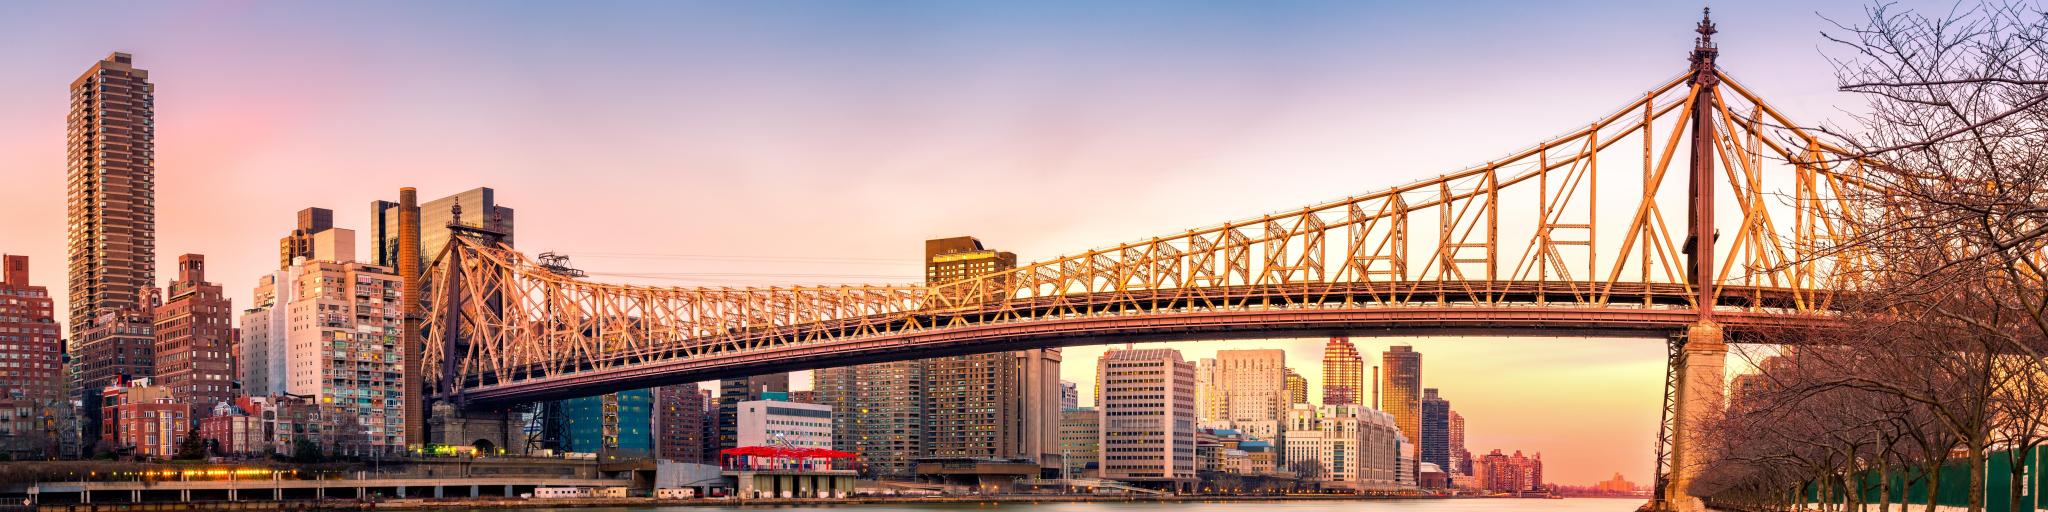 Queensboro bridge panorama at sunset, as viewed from Roosevelt Island